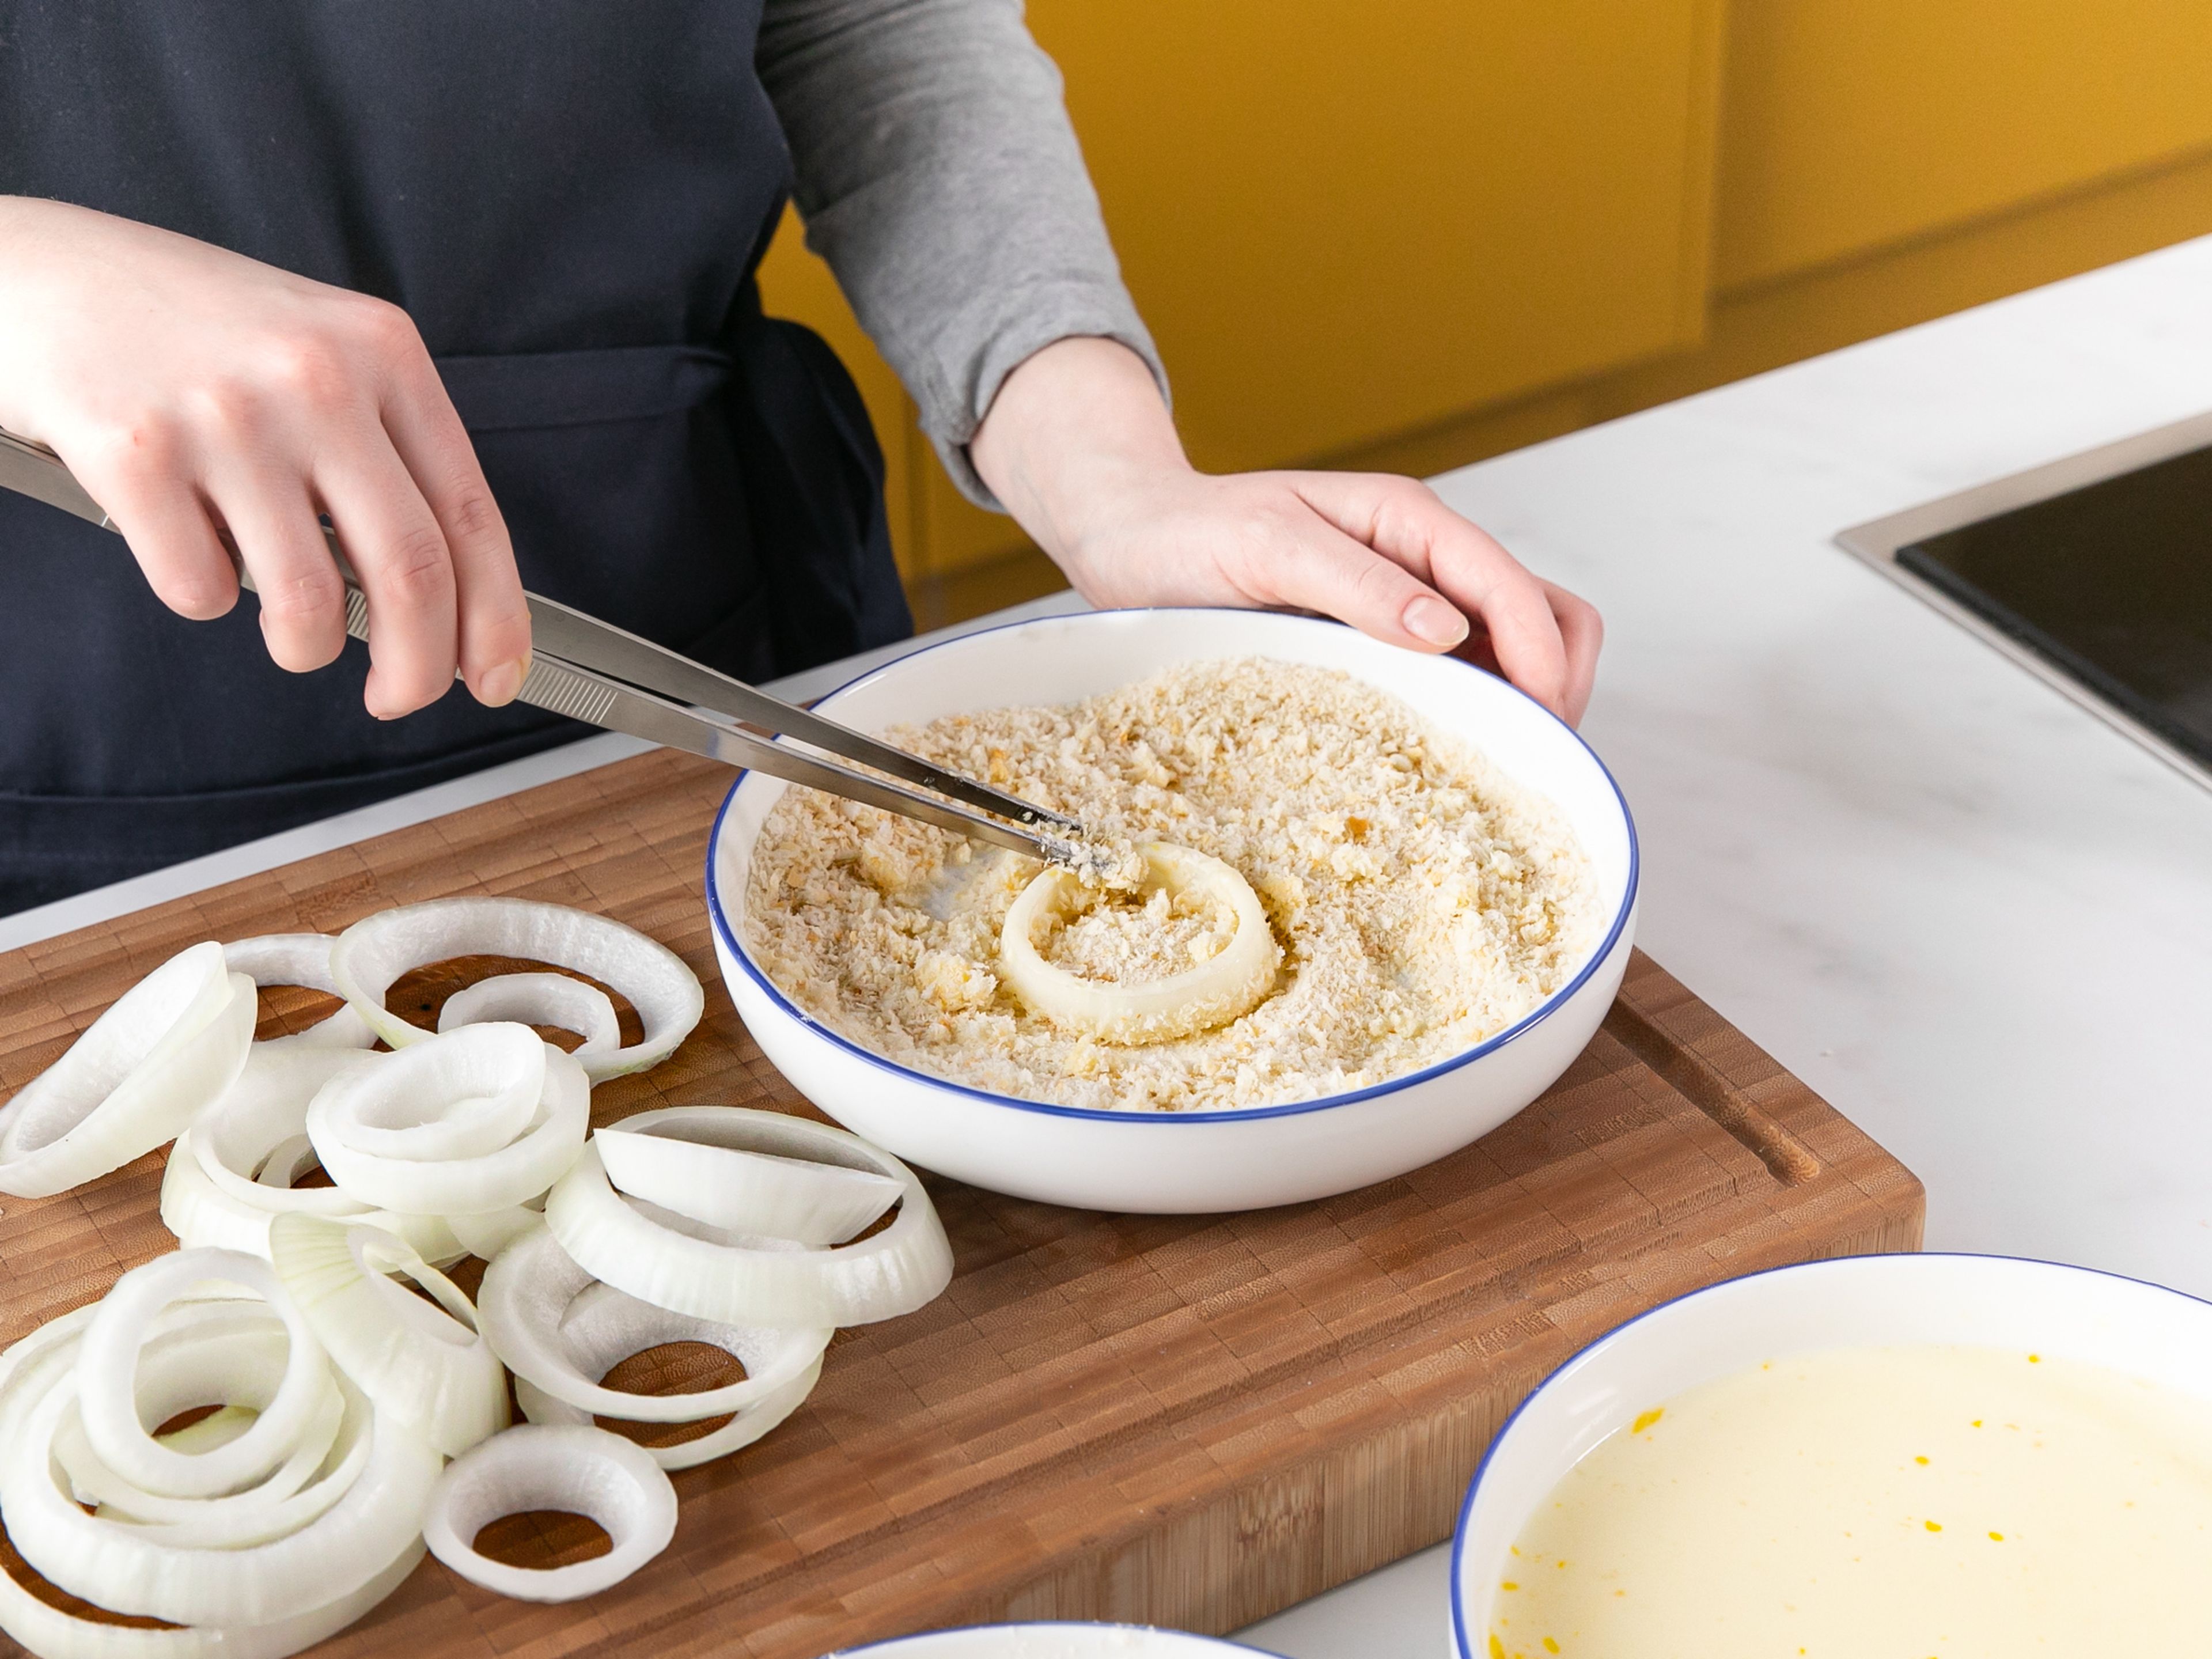 Dip onion rings into the flour mixture, shaking off the excess. Then dip into the egg mixture, shake off the excess, and coat all over in breadcrumbs. Transfer to a baking sheet and repeat with all onion rings.